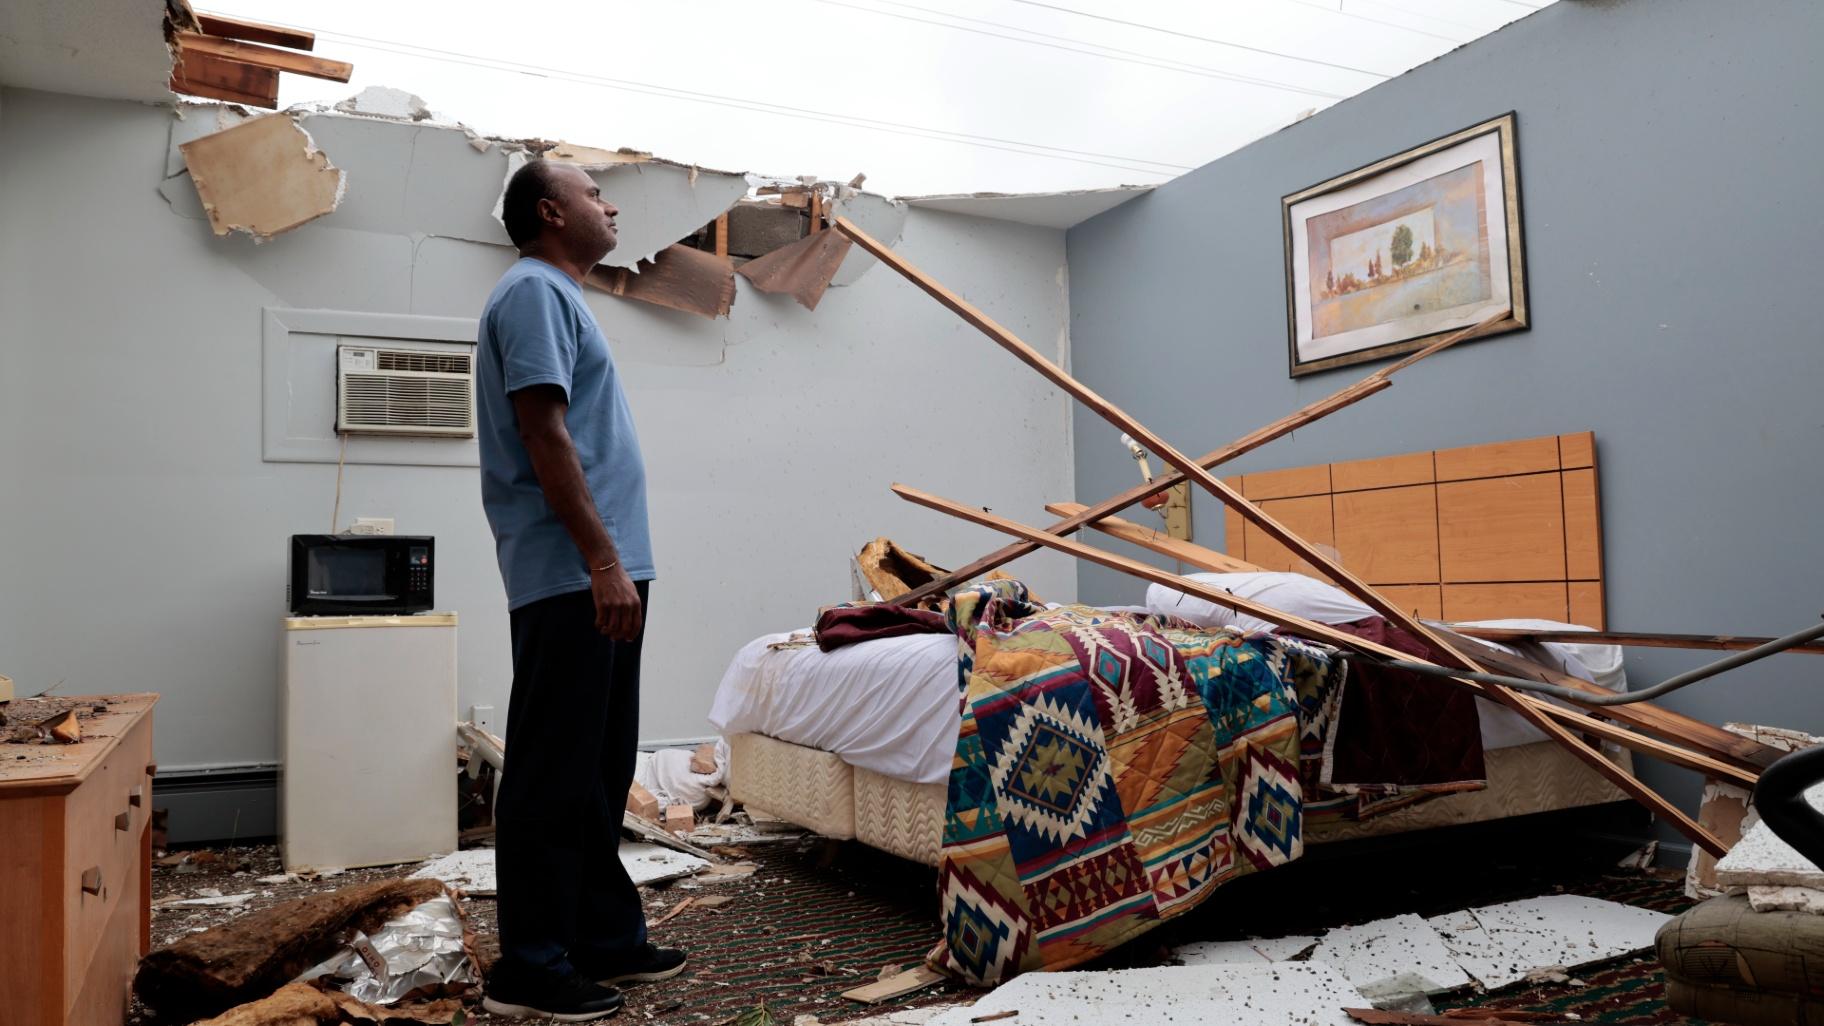 With the roof blown off by severe winds, Brian Patel, owner of the Skyline Motel in the suburban town of McCook, Ill., for the past 30 years, surveys storm damage in one of the motel rooms, Thursday, July 13, 2023. (Antonio Perez / Chicago Tribune via AP)